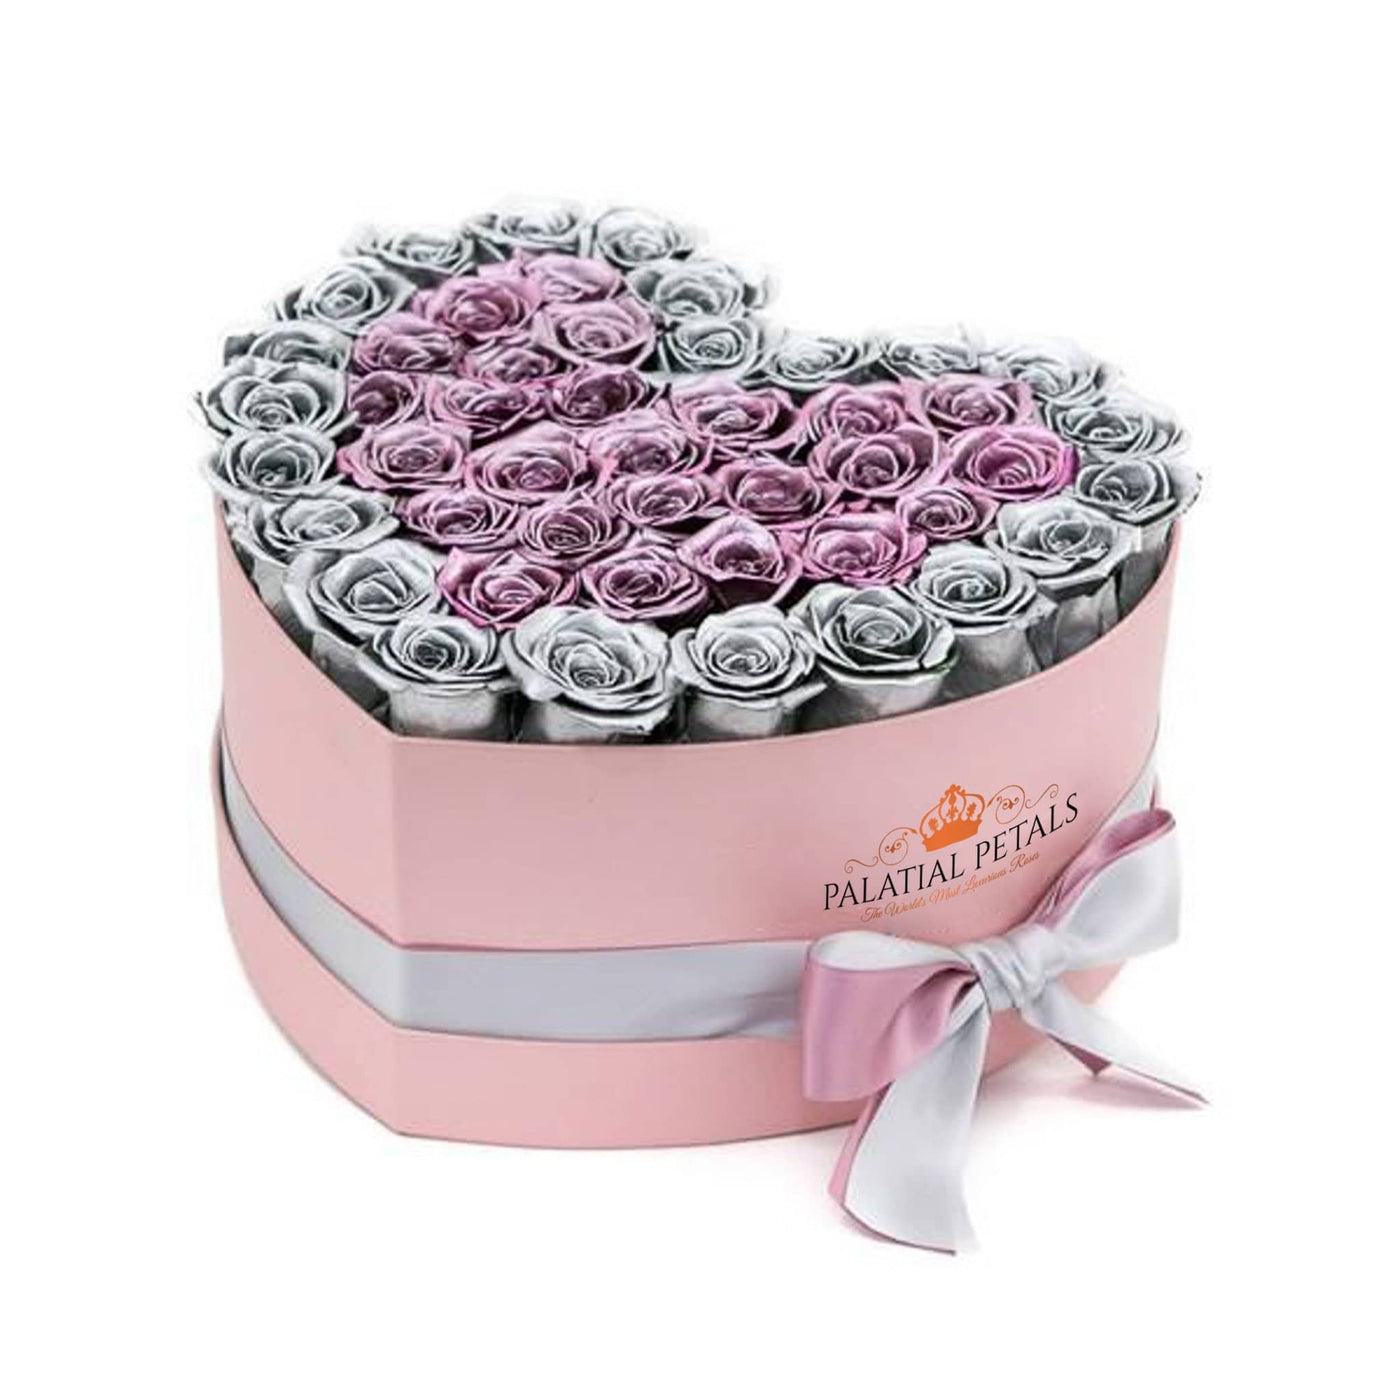 Metallic Pink & Silver Roses That Last A Year - Love Heart Rose Box